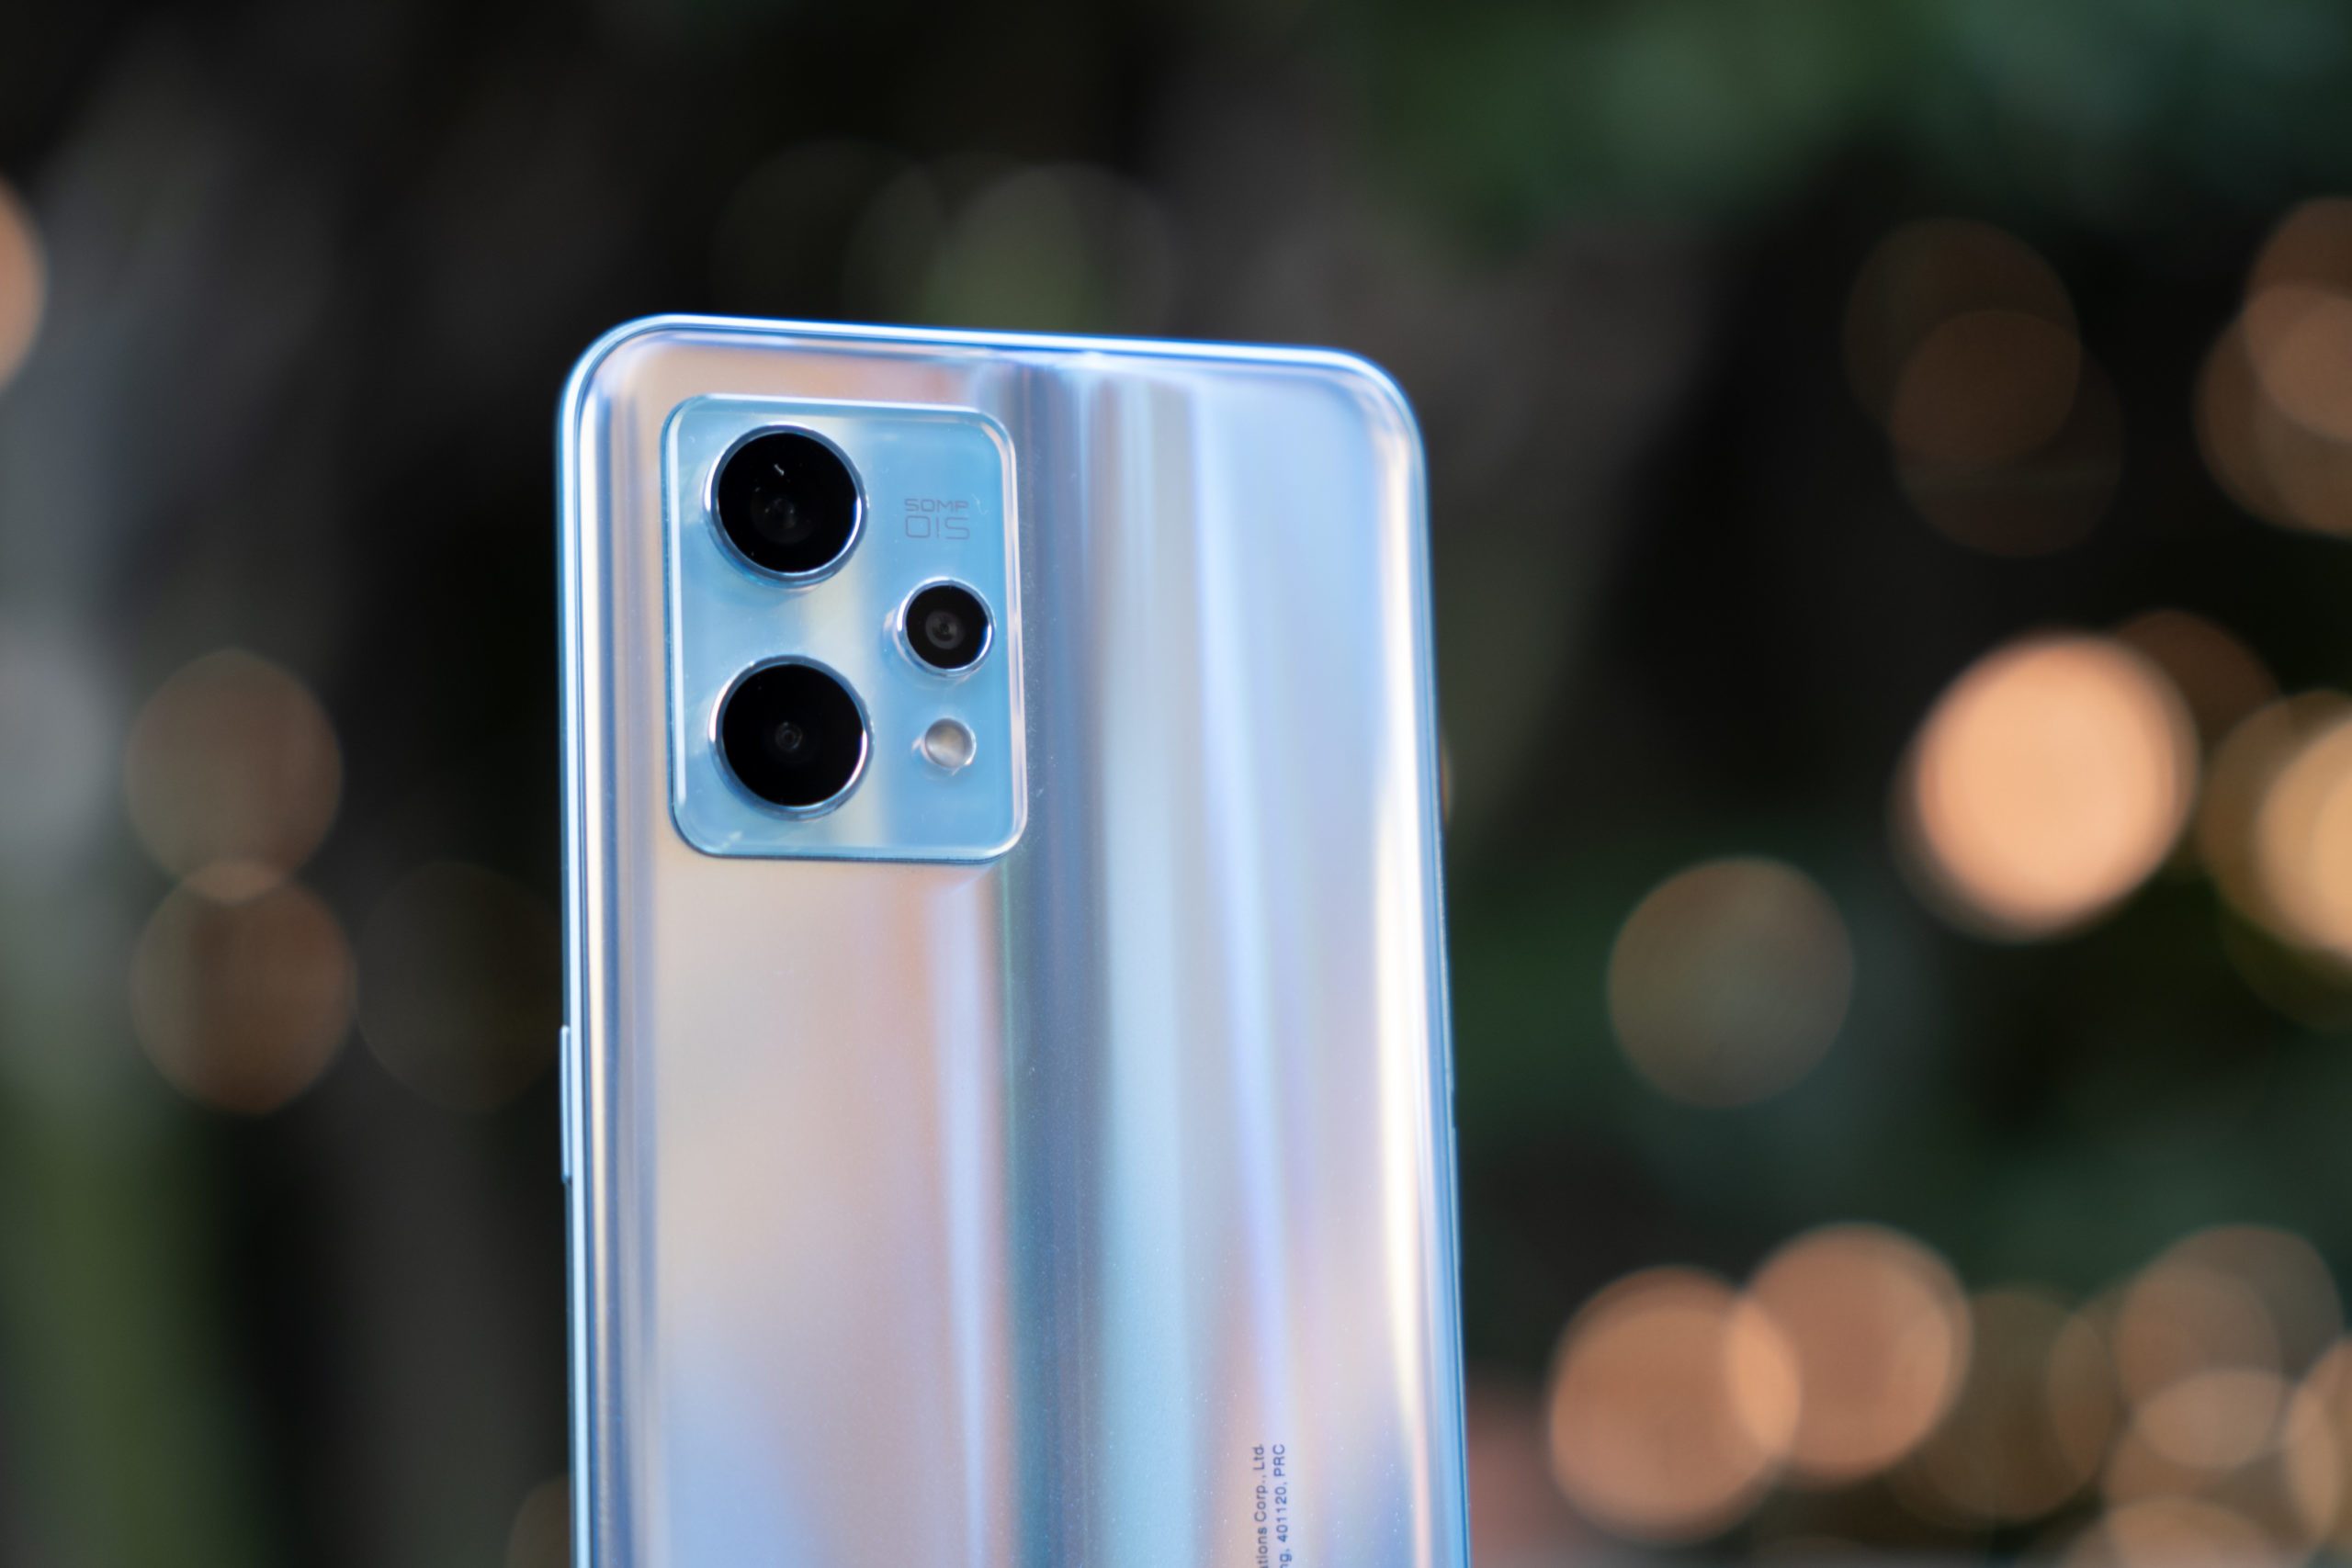 Realme 9 Pro Plus Review- Flagship Experience At Mid-Range Pricing